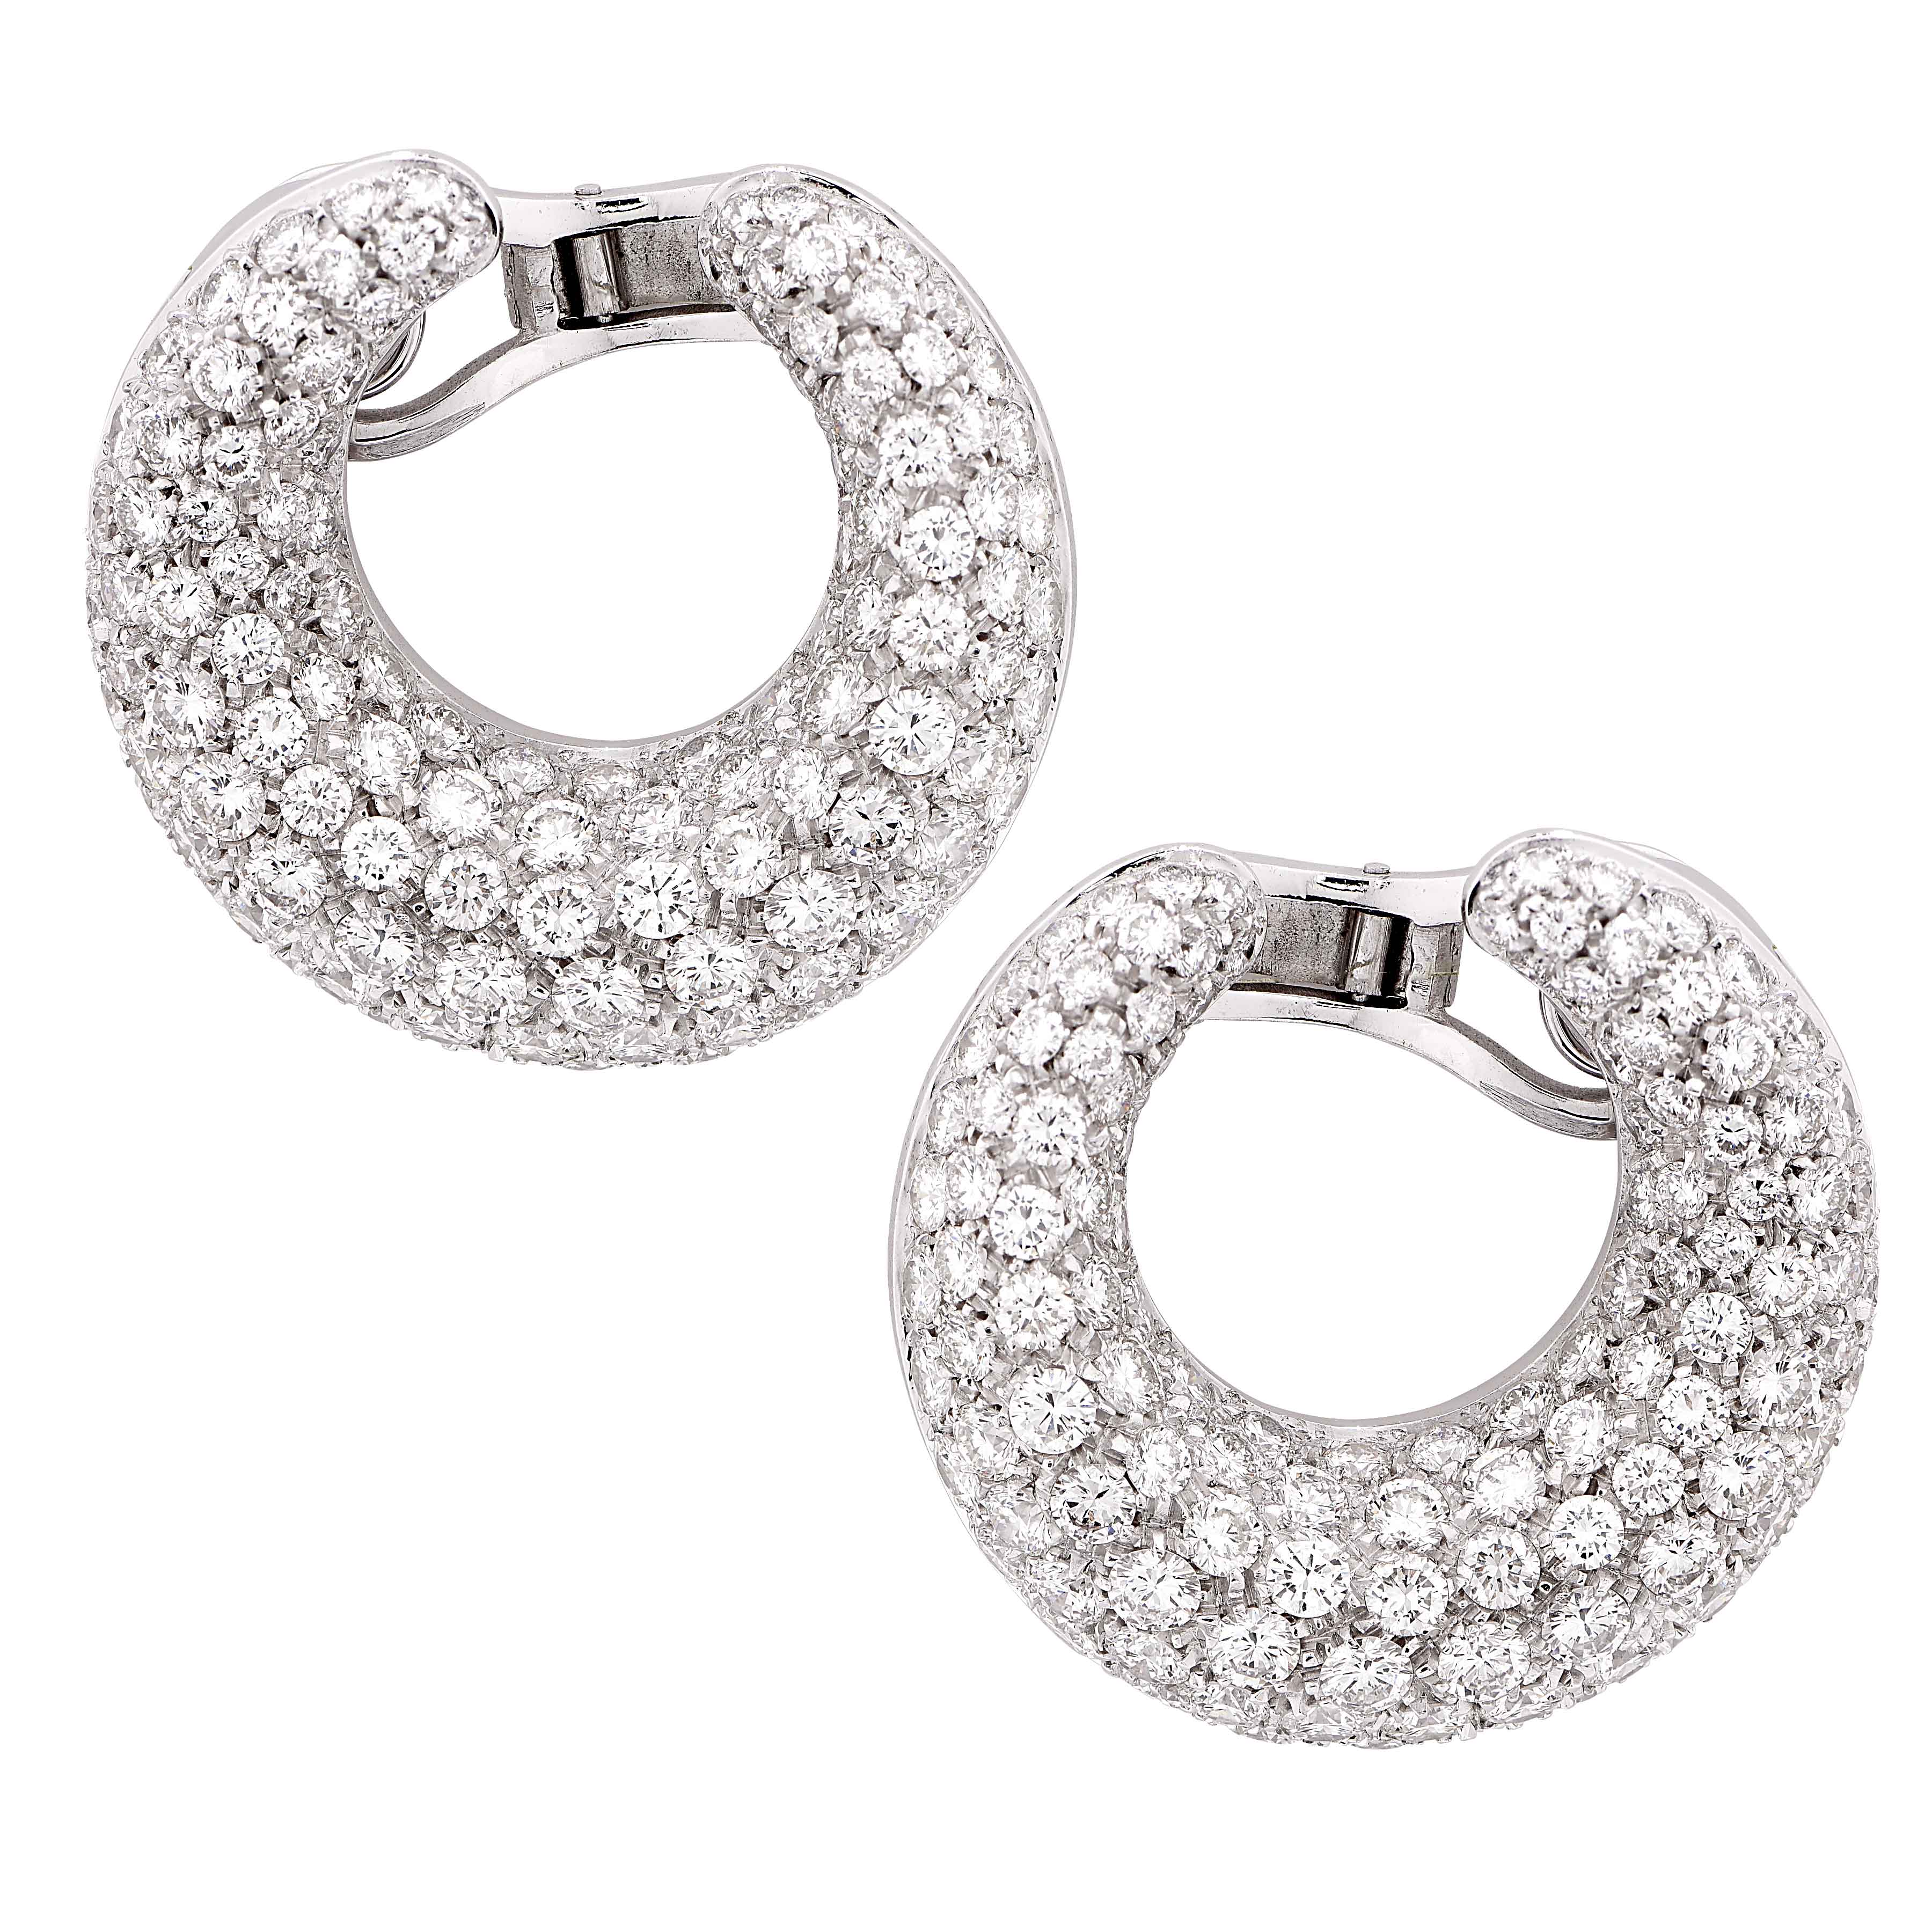 13.5 Carat Total Weight Diamond Bombe Crescent Form Clip Earrings